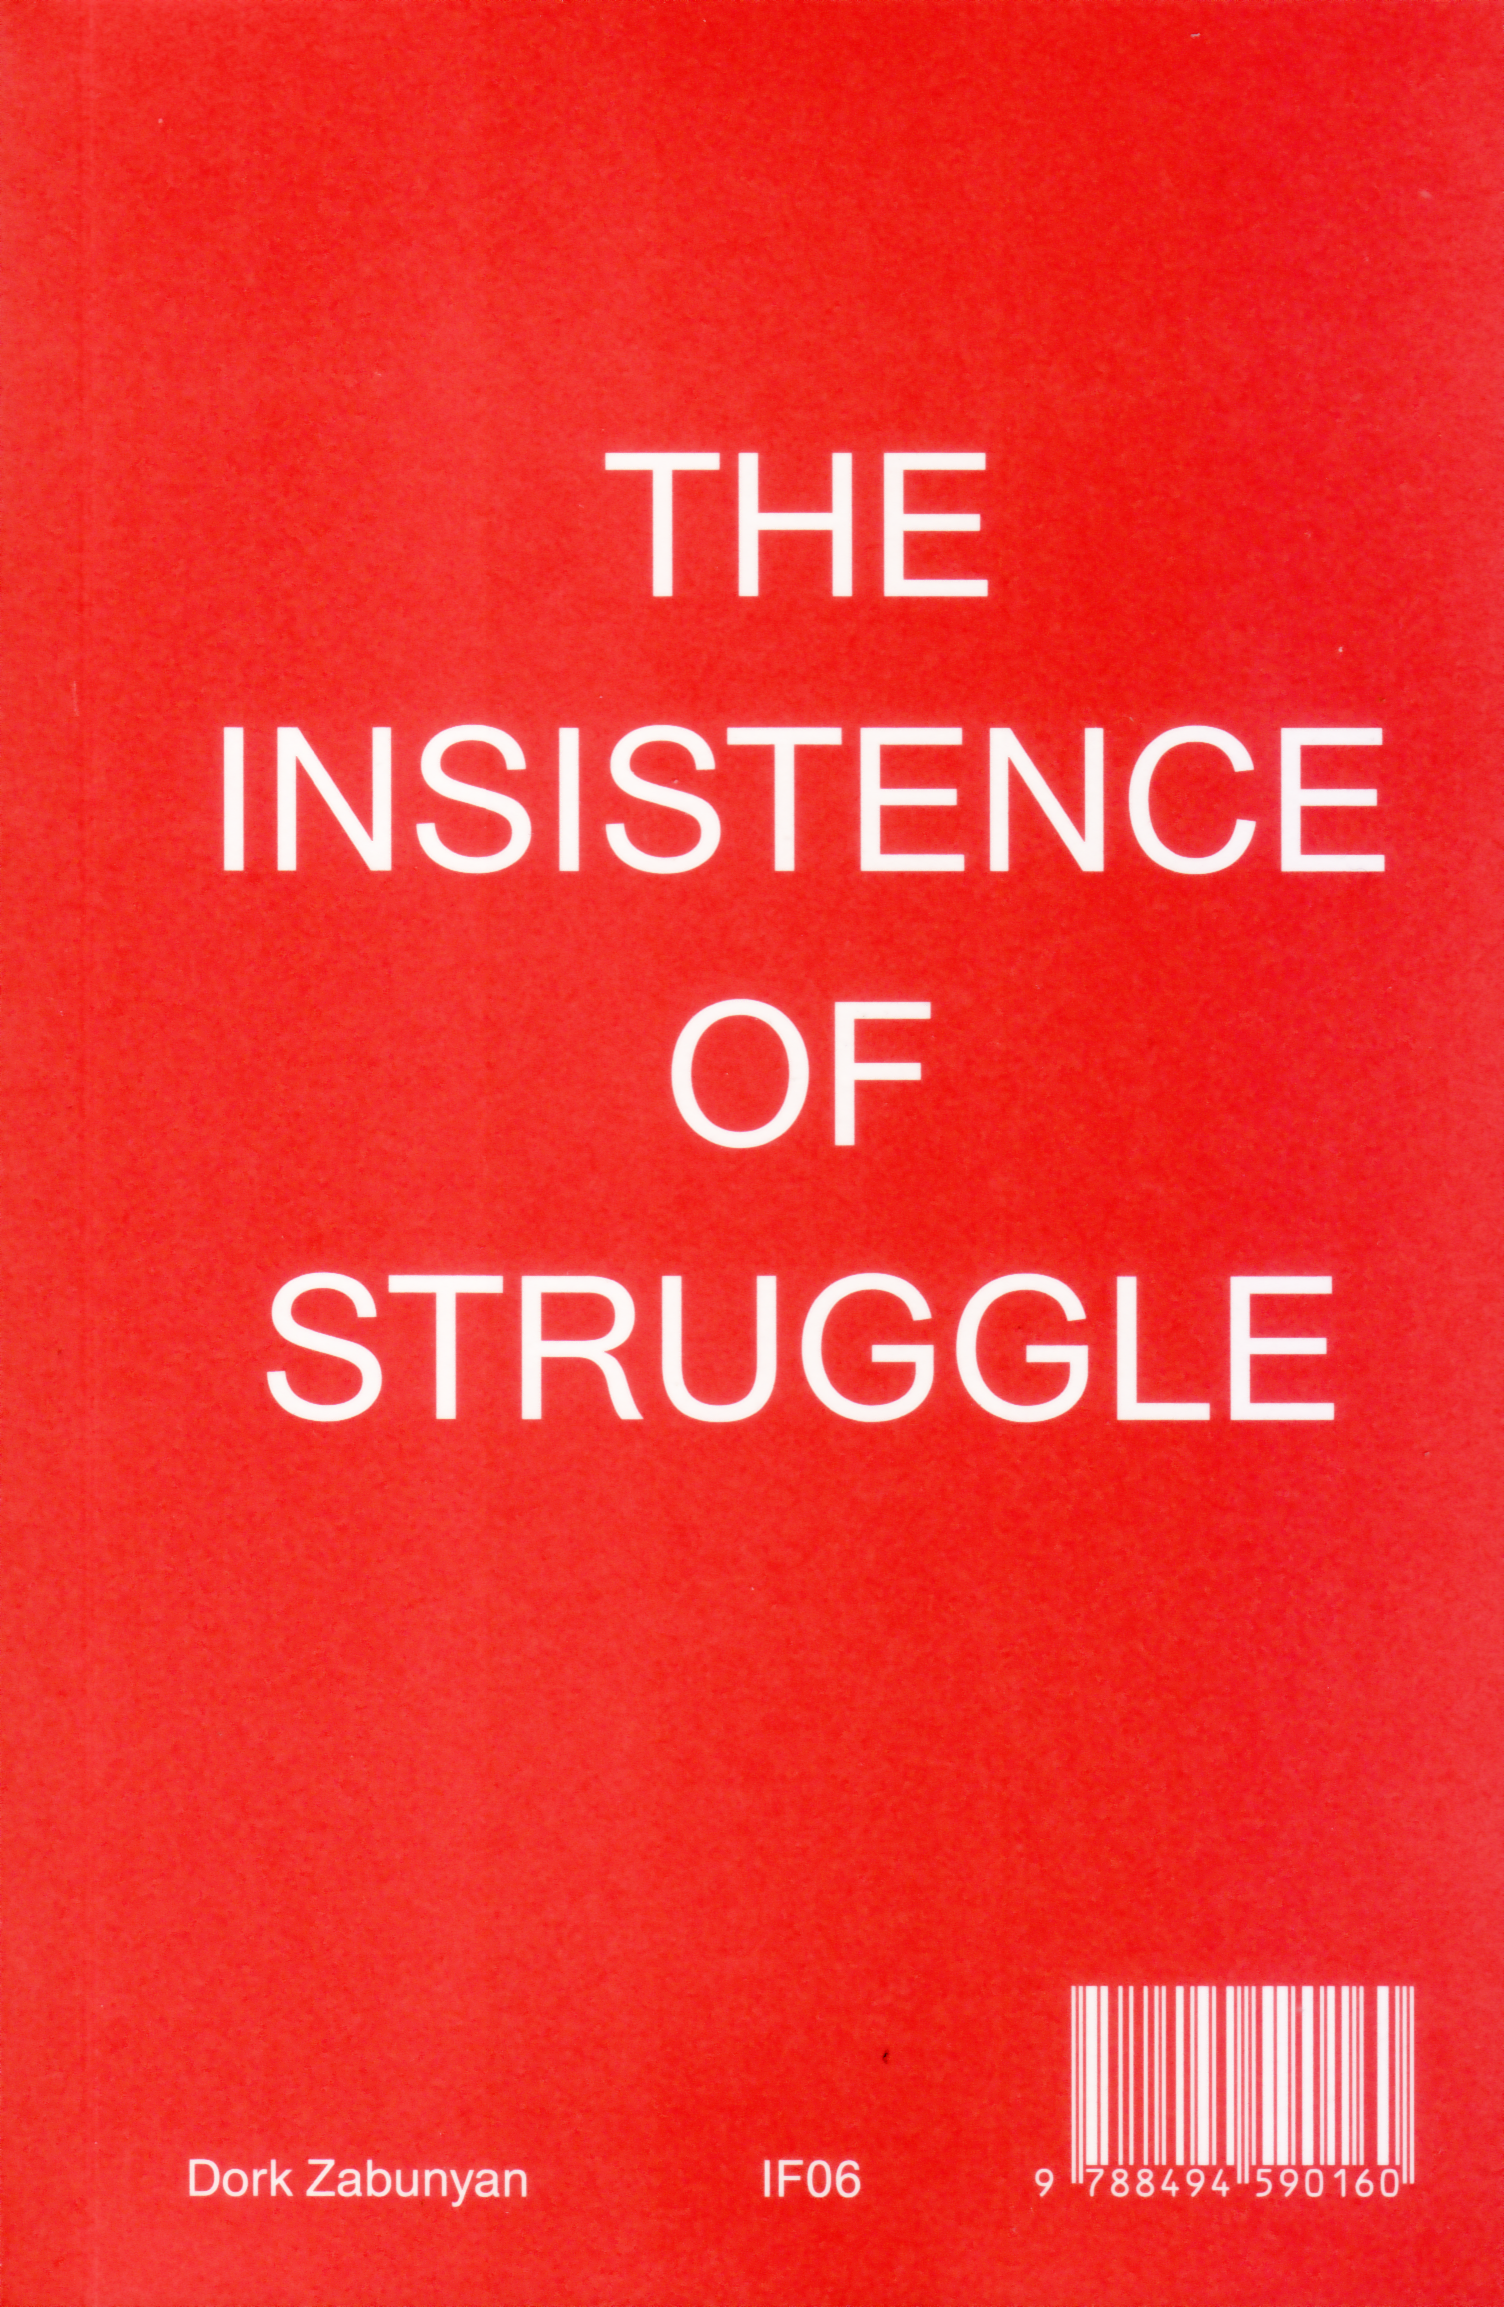 THE INSISTENCE OF STRUGGLE - ABBOU NADDARA COLLECTIVE